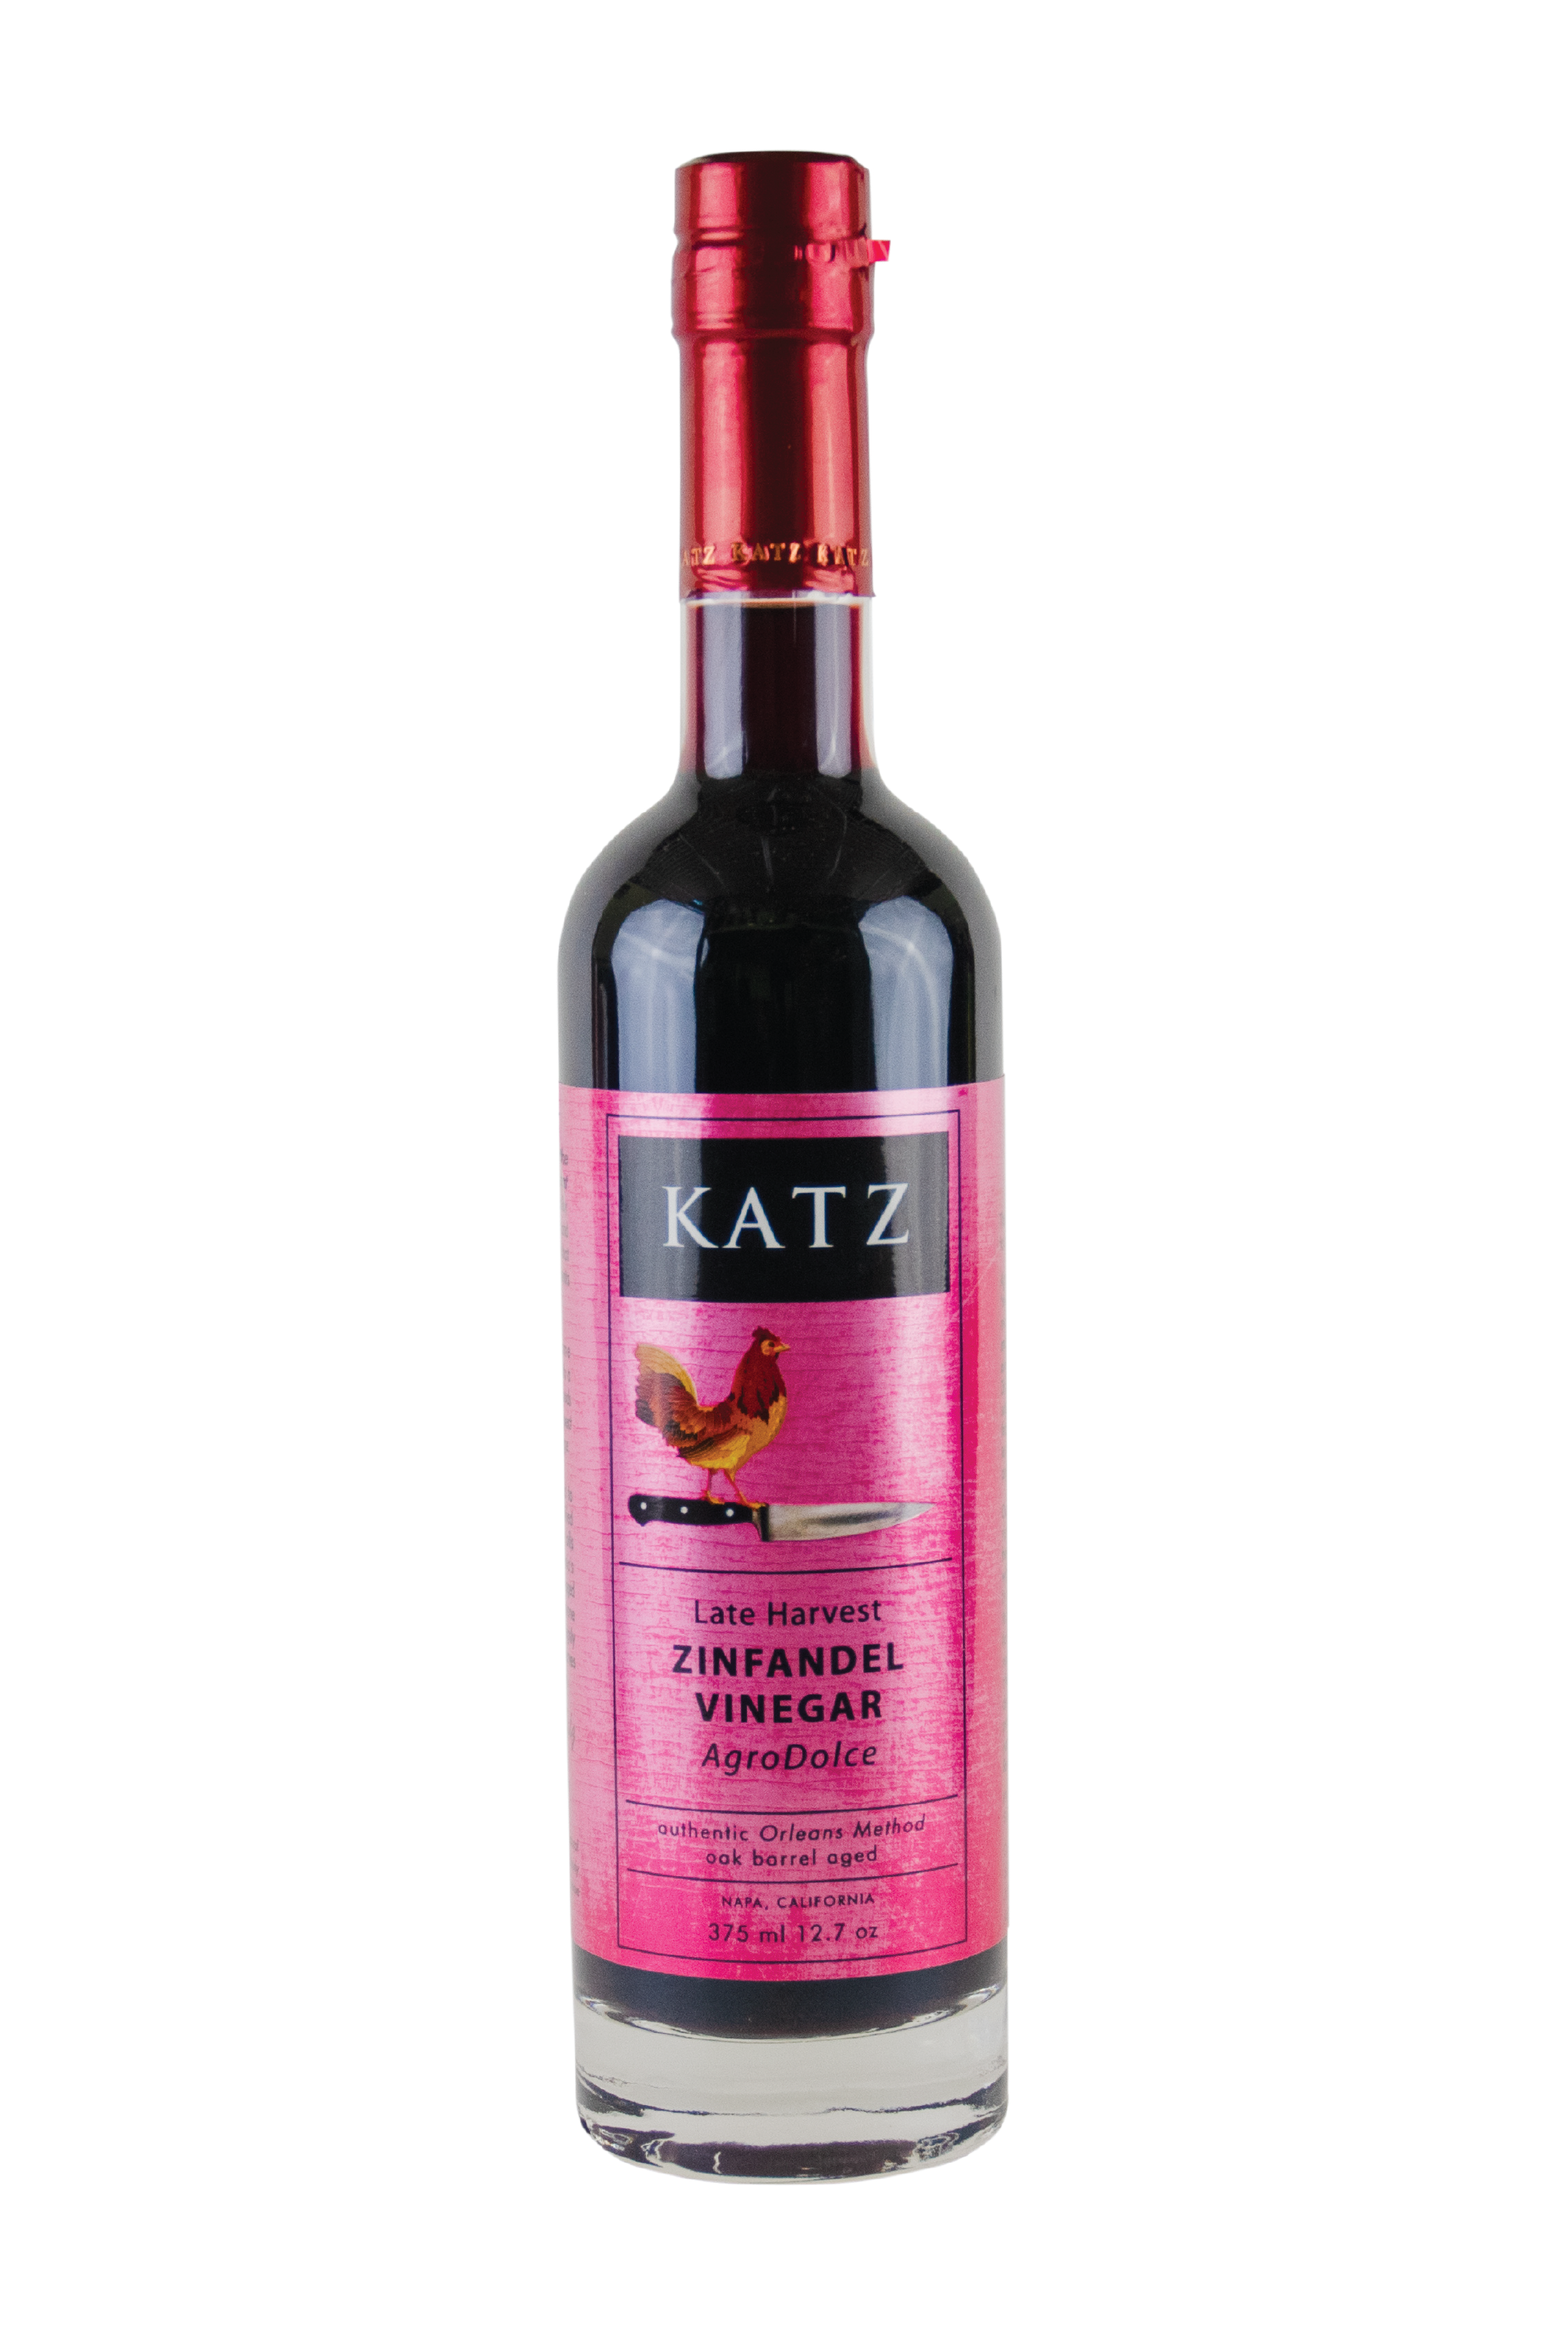 A 375 ml/12.7 oz glass bottle of Katz Late Harvest Zinfandel Agrodolce Vinegar on a white background. Label is light red green and black with the image of a rooster standing on the hilt of a chef's knife and the words, "Authentic Orleans Method, oak barrel aged" and "Napa, California" on the bottle. Vinegar is a dark burgundy, visible through the clear glass bottle, with red foil shrink wrap on the top with the word "Katz" printed around the circumference.